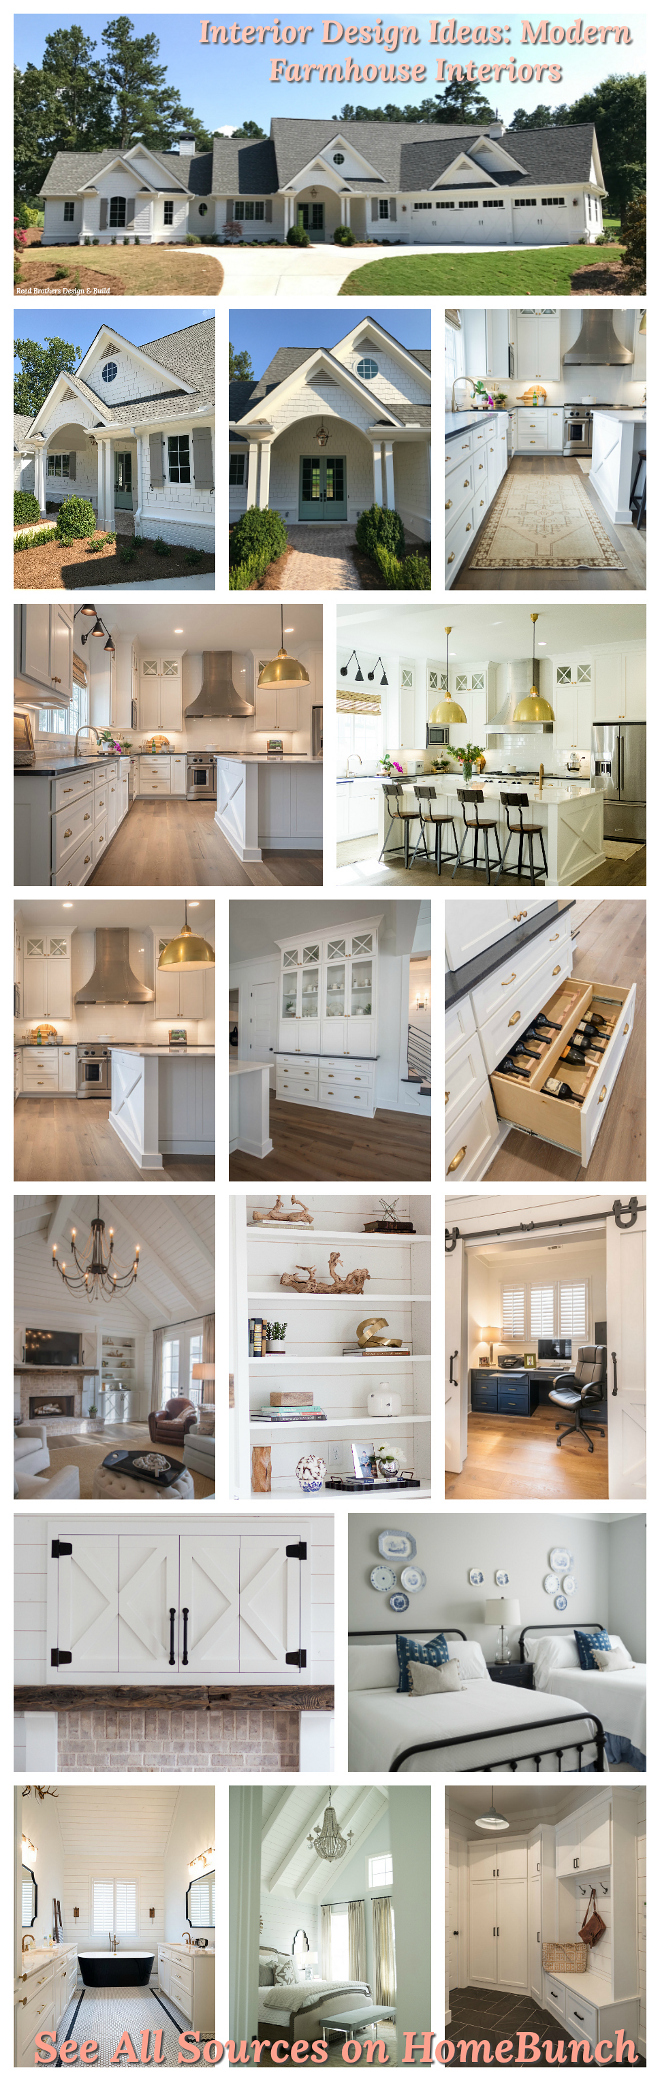 Interior Design Ideas Modern Farmhouse Interiors See Paint Colors and All Decor sources on Home Bunch blog